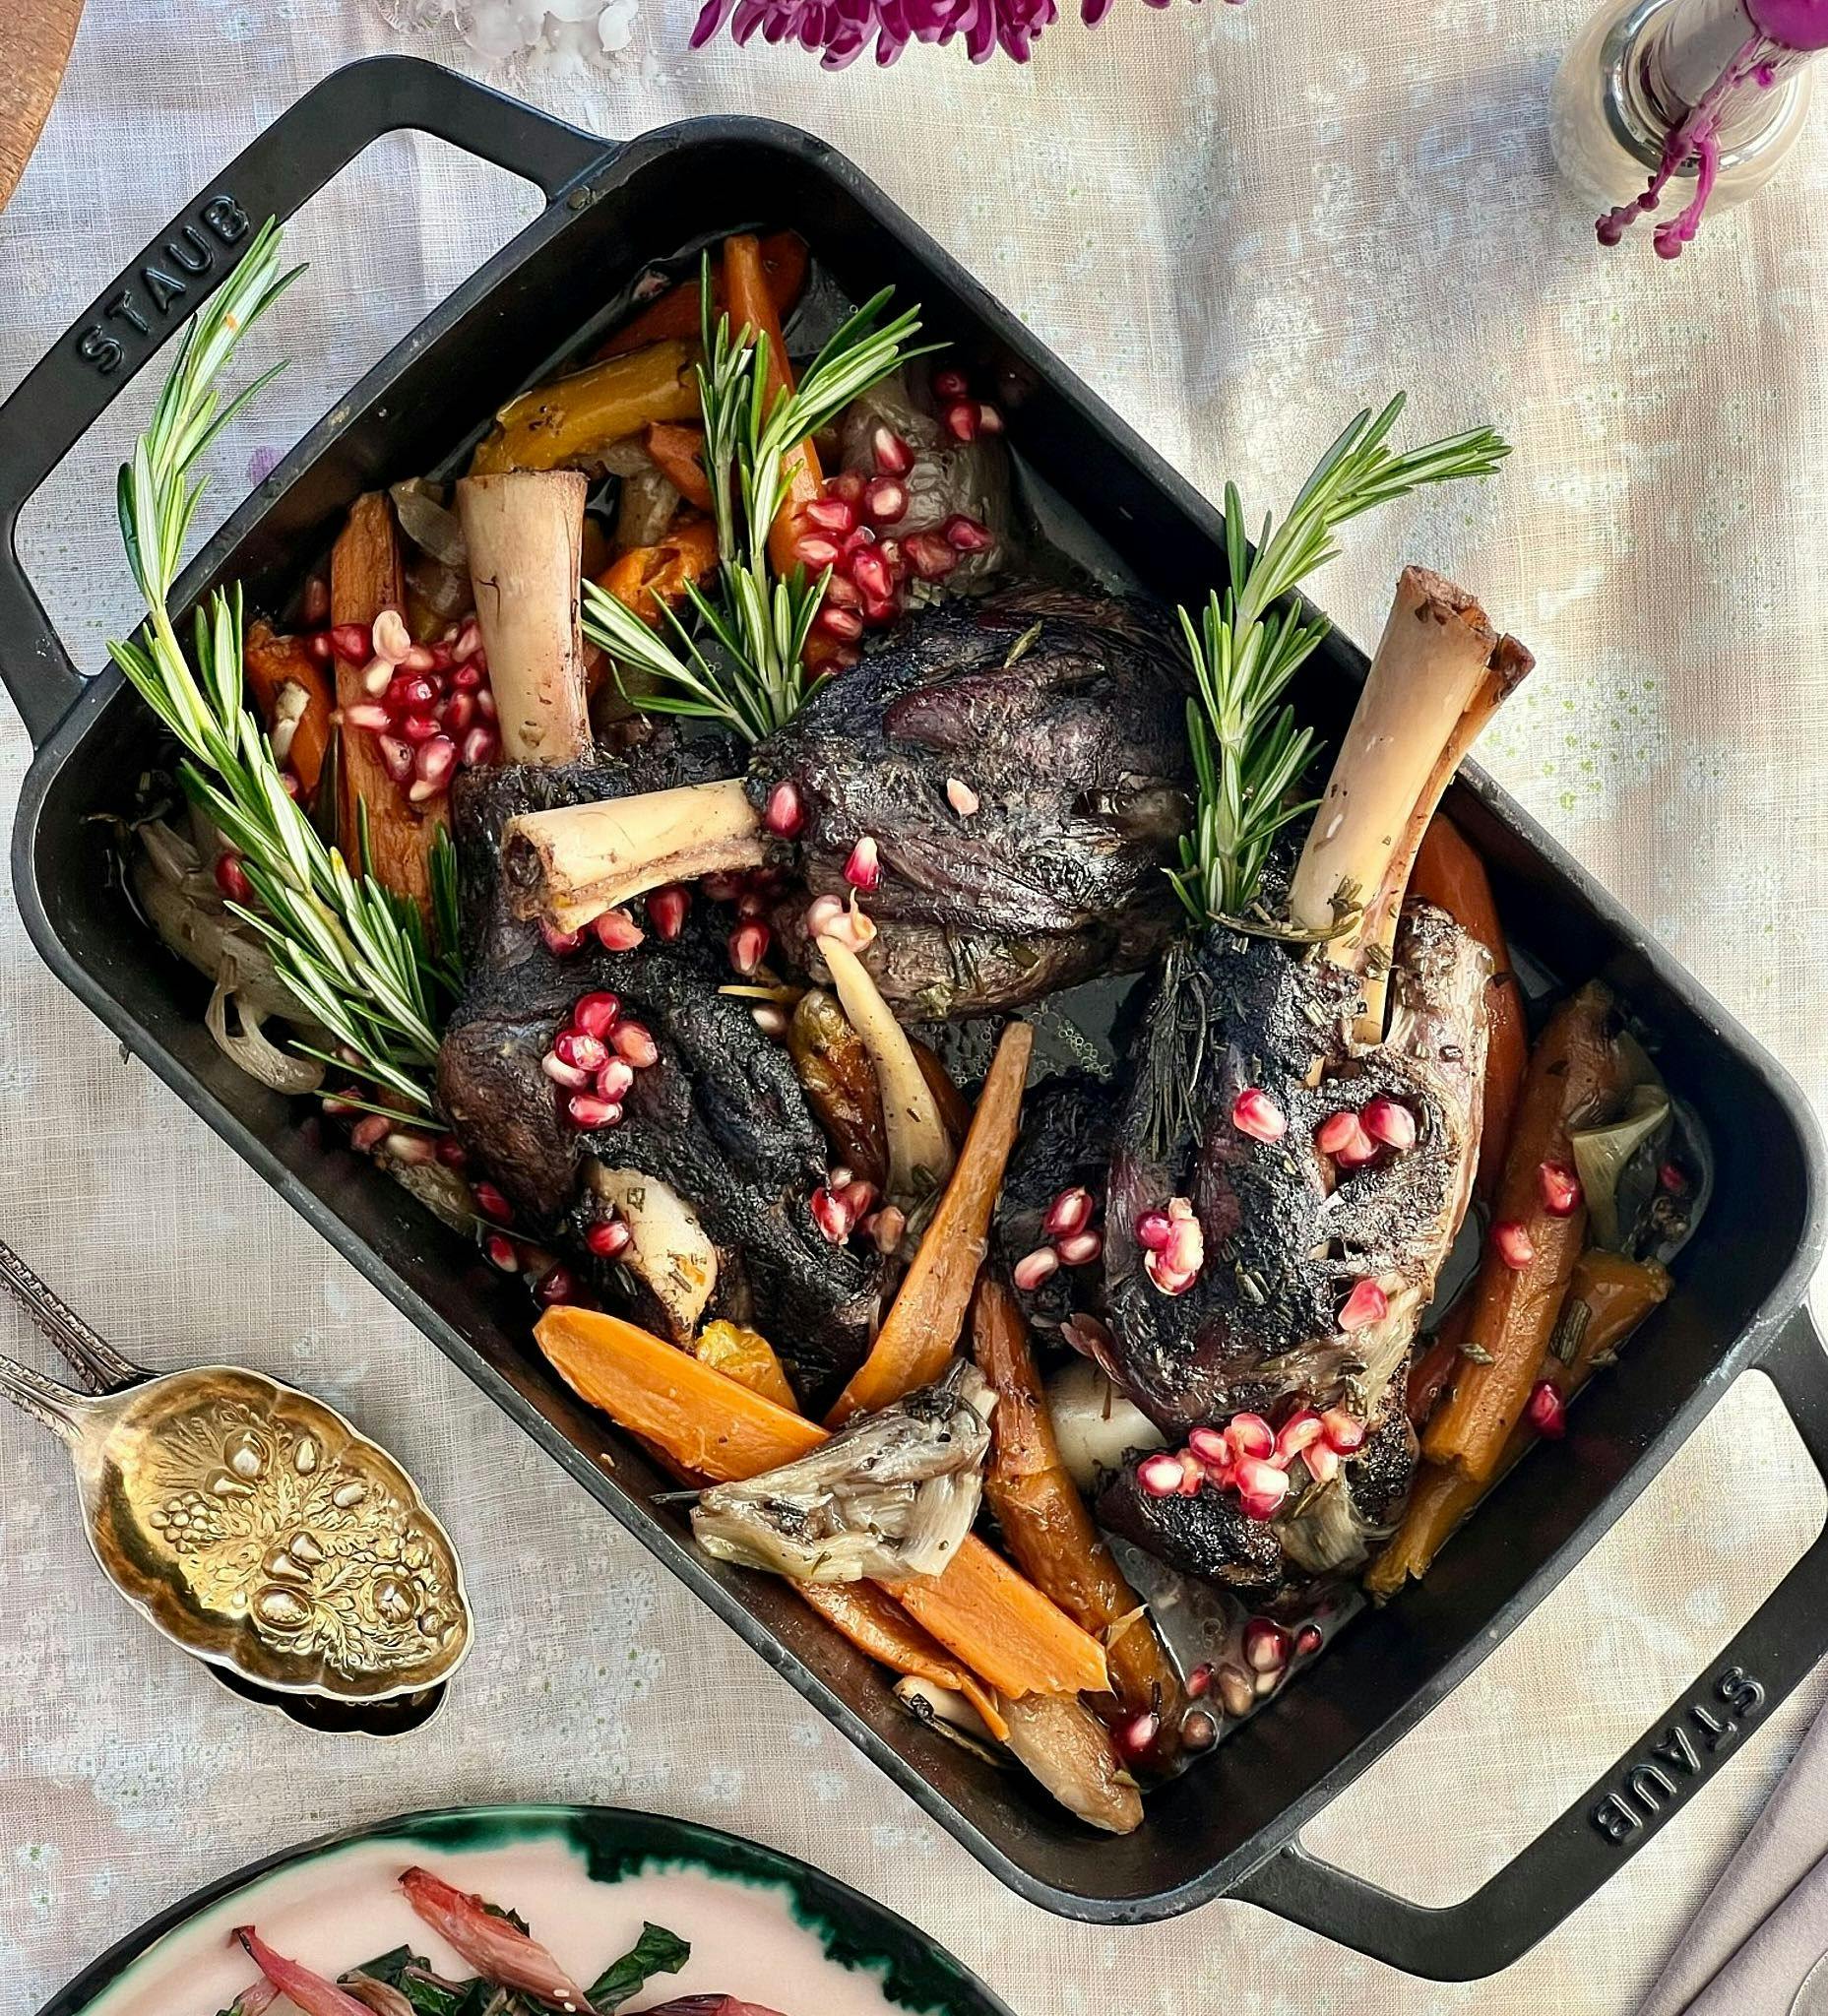 Braised Lamb with carrots, pomegranate seeds, & rosemary sprigs in serving dish